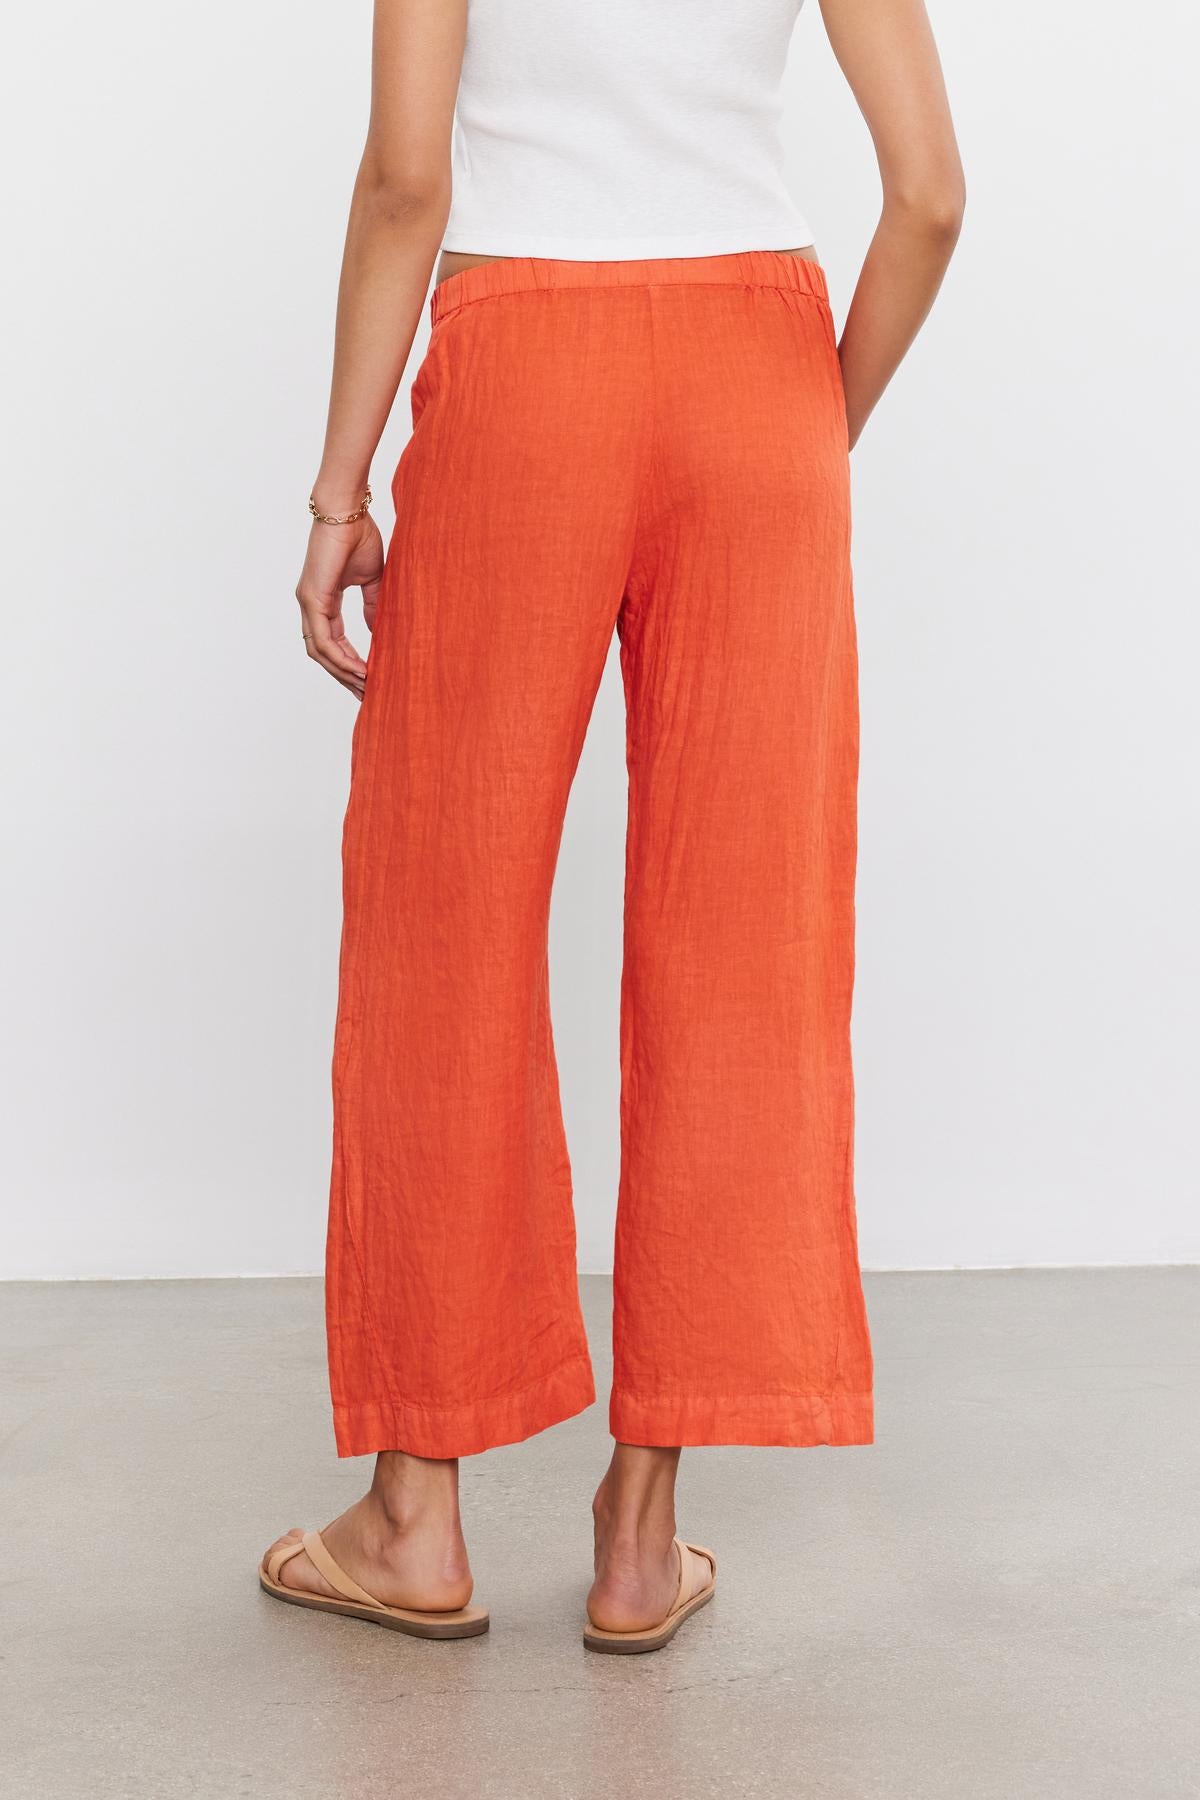 A person is standing, facing away, wearing bright orange LOLA LINEN PANT by Velvet by Graham & Spencer paired with a white top and beige flip-flops.-36910043955393